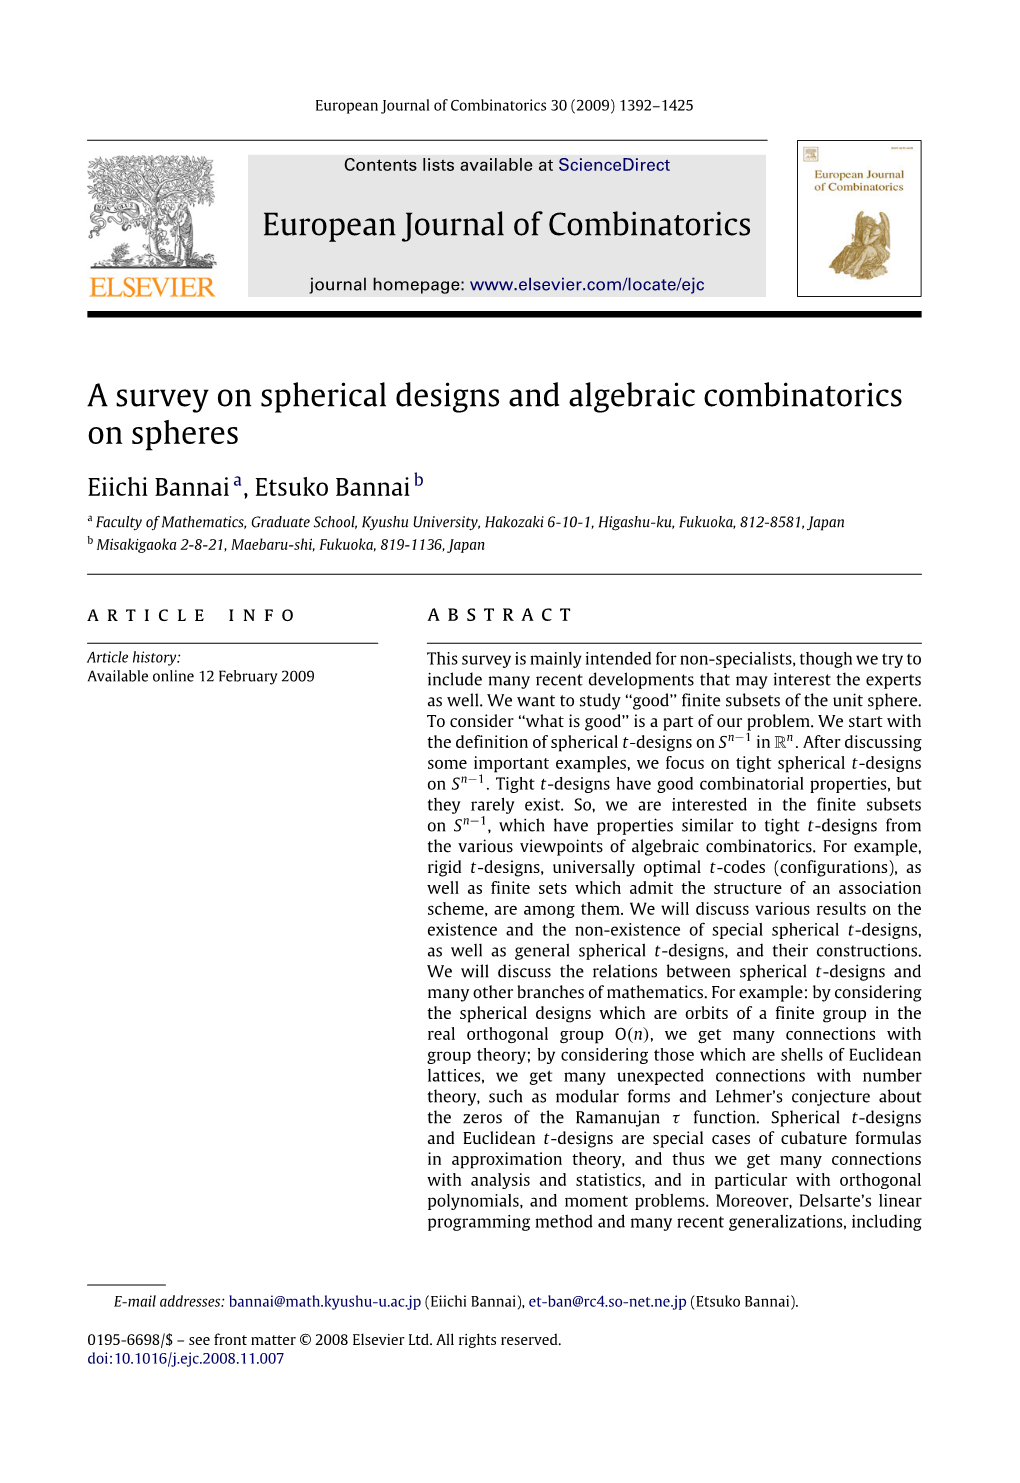 European Journal of Combinatorics a Survey on Spherical Designs And